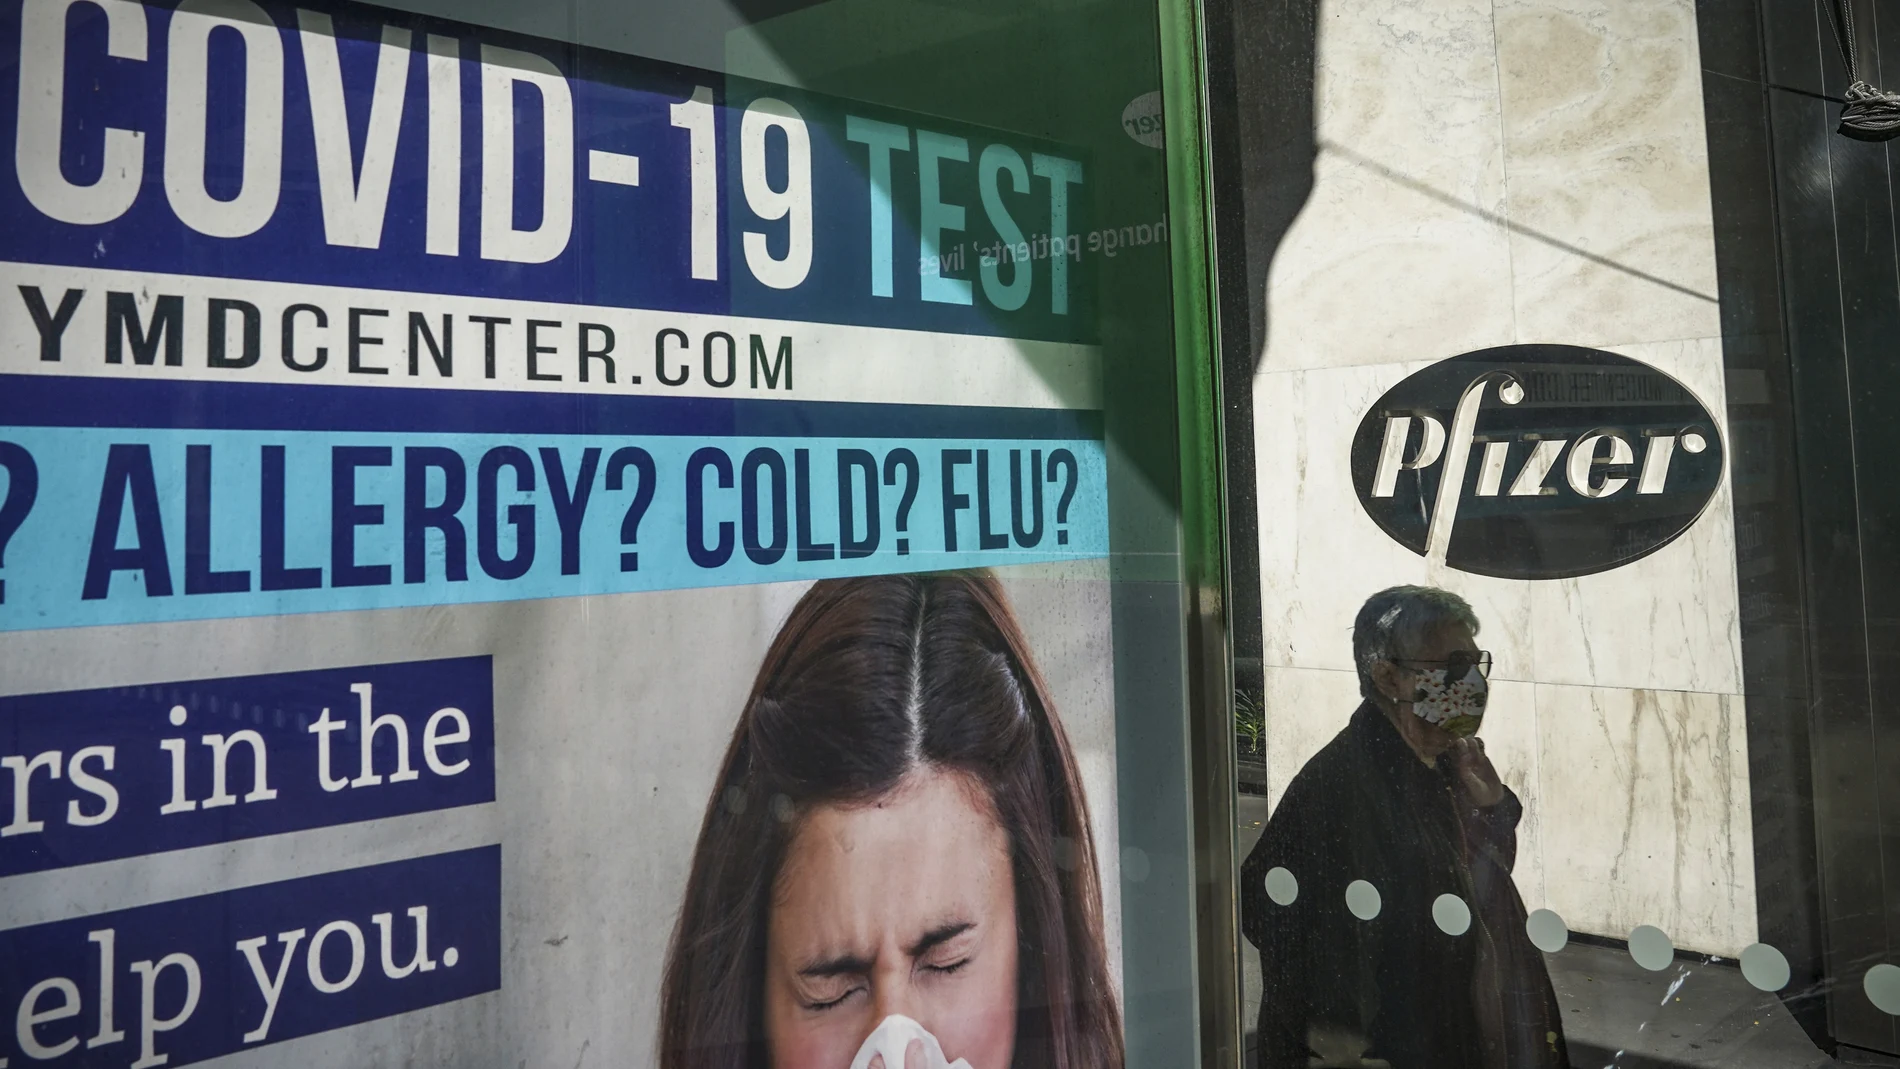 A bus stop ad for COVID-19 testing is shown outside Pfizer world headquarters in New York on Monday Nov. 9, 2020. Pfizer says an early peek at its vaccine data suggests the shots may be 90% effective at preventing COVID-19, but it doesn't mean a vaccine is imminent. (AP Photo/Bebeto Matthews)